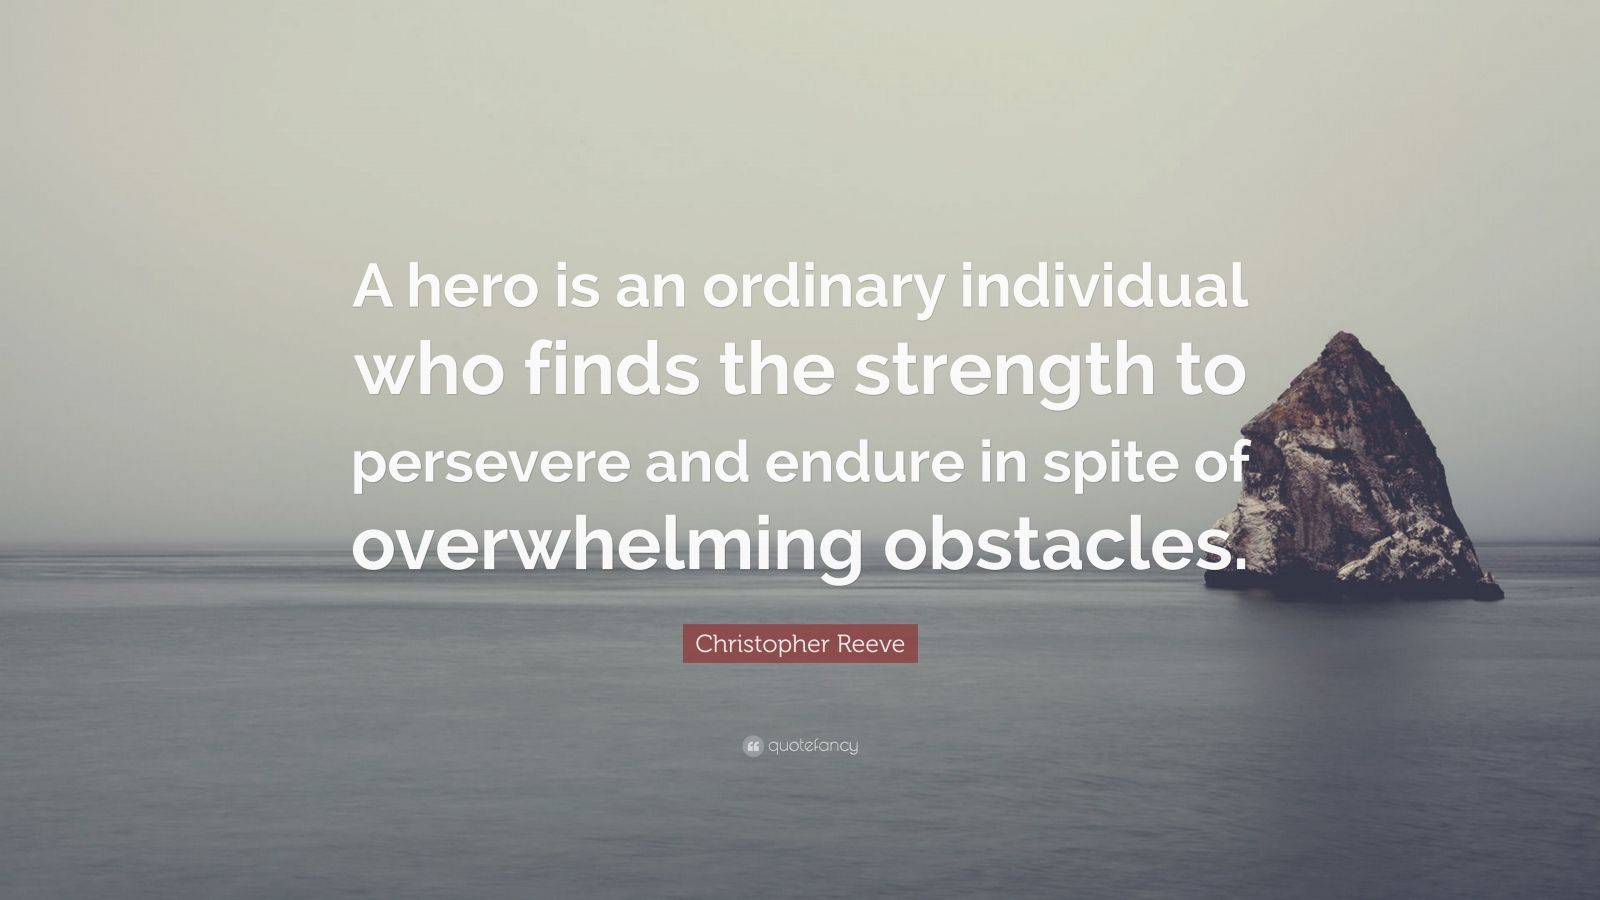 1708255 Christopher Reeve Quote A hero is an ordinary individual who finds